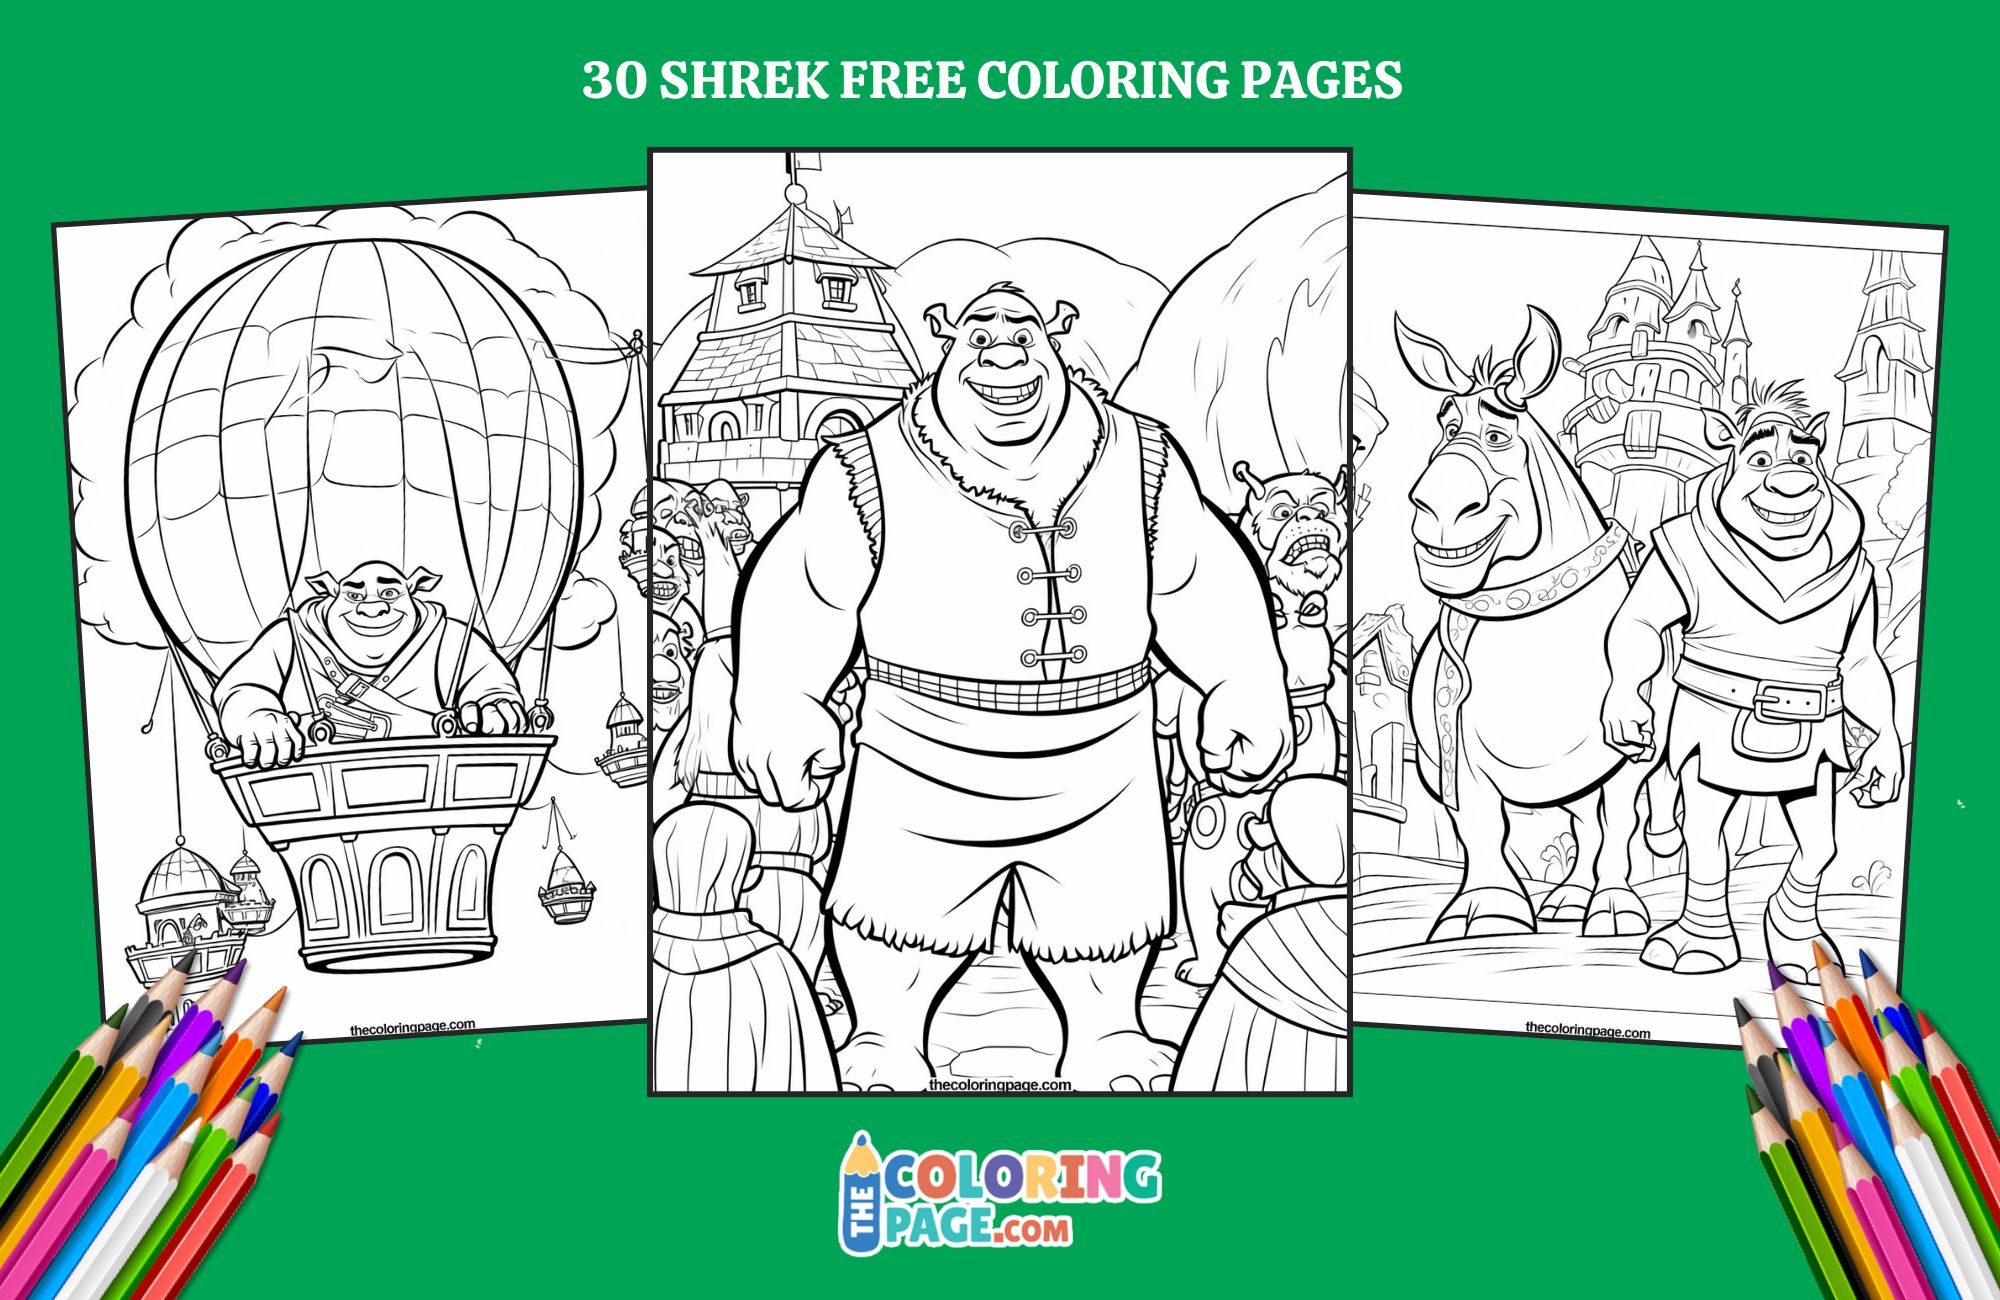 30 Free Shrek Coloring Pages For Kids